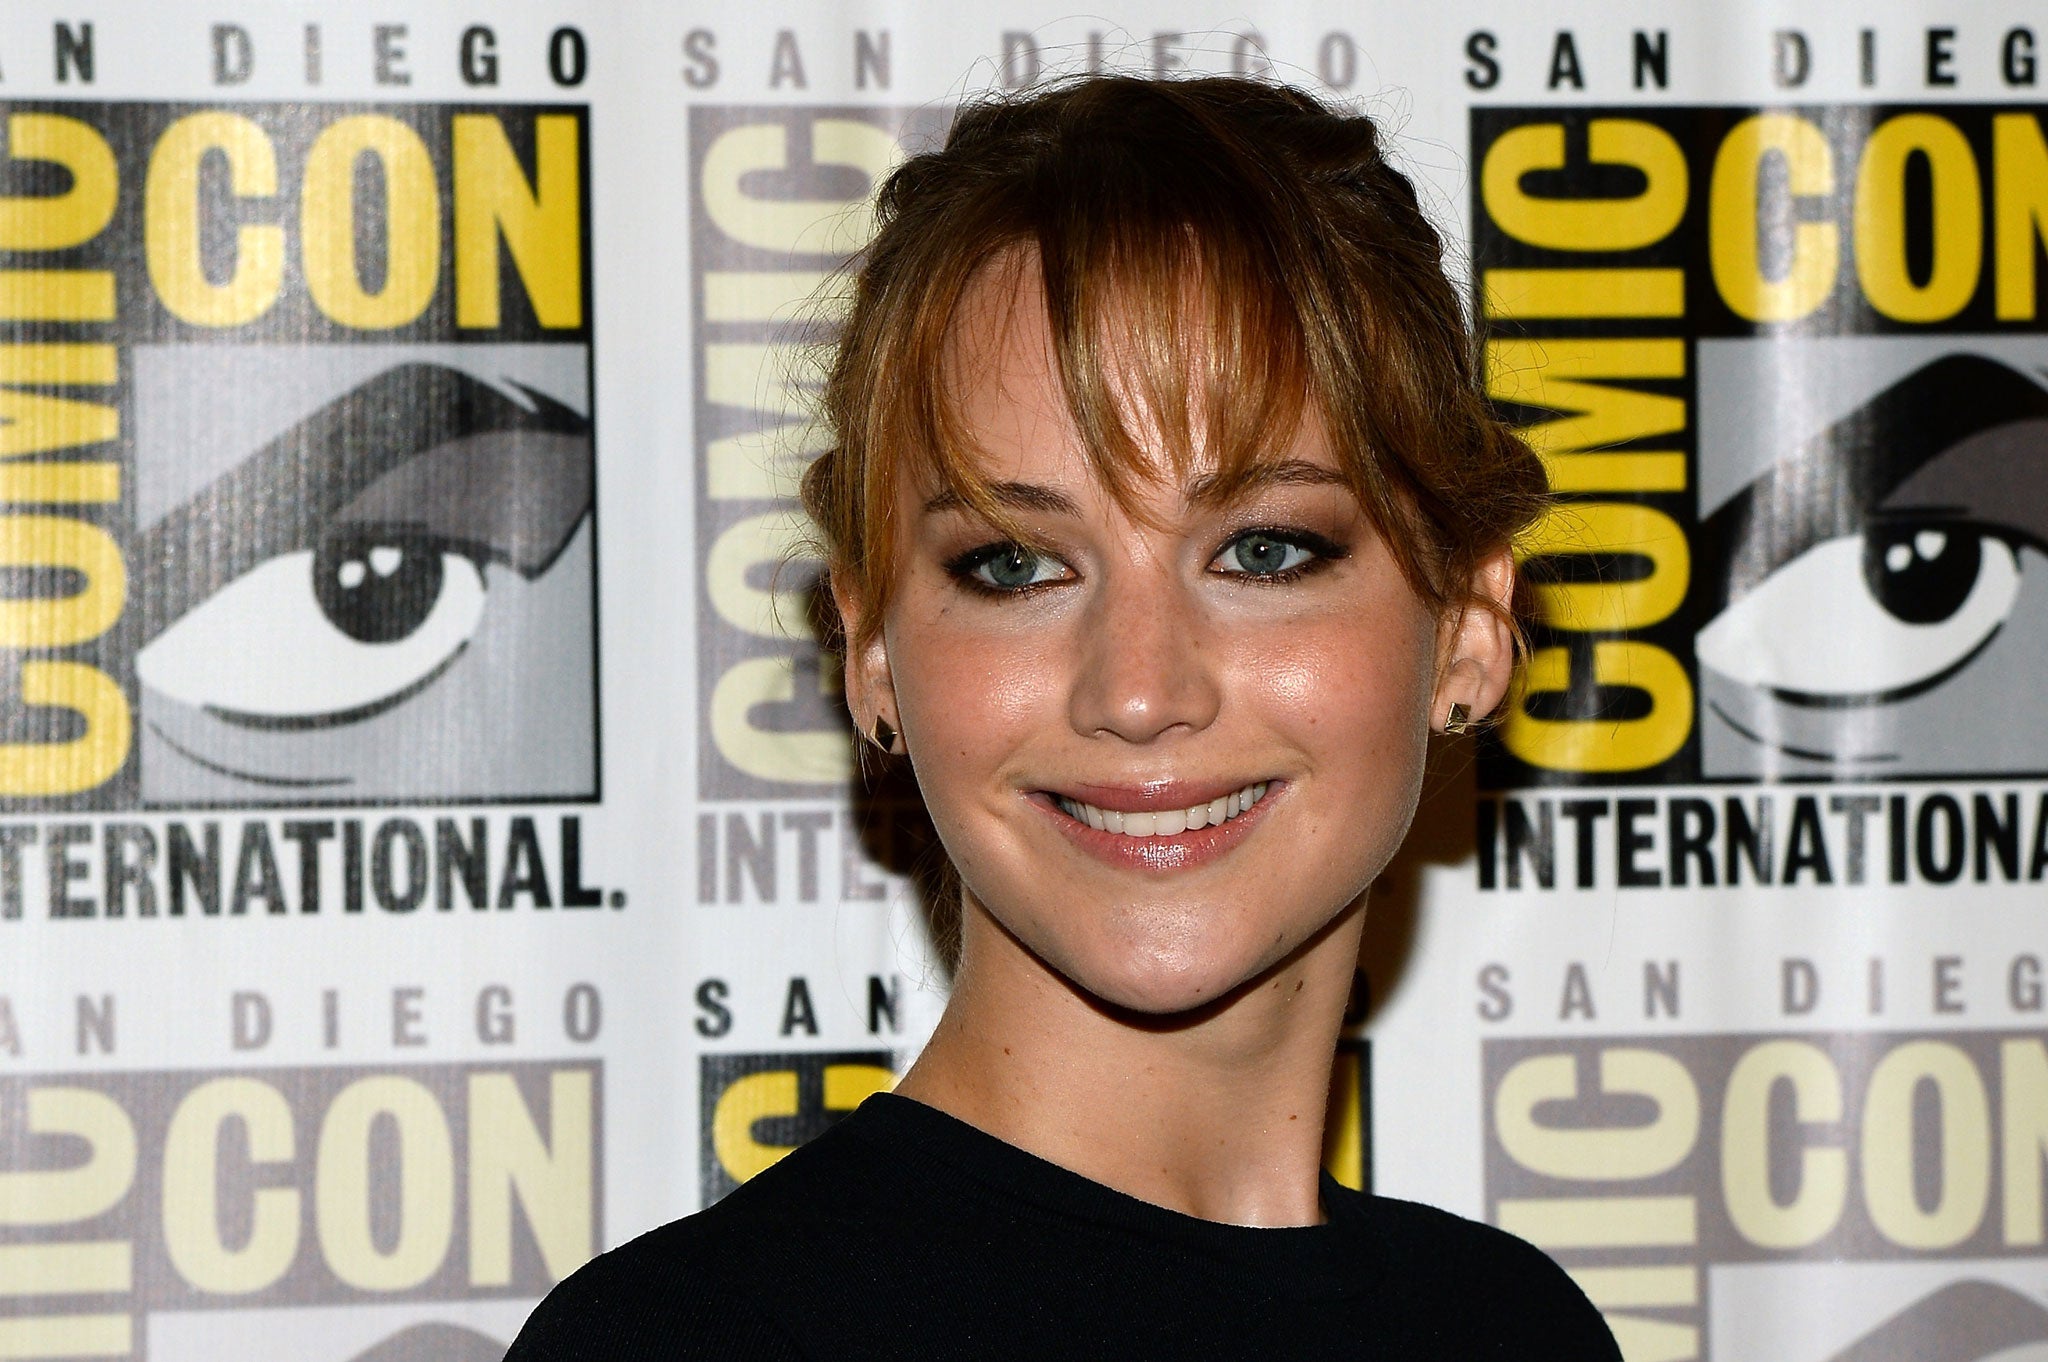 Jennifer Lawrence is one of Hollywood's most in-demand actresses